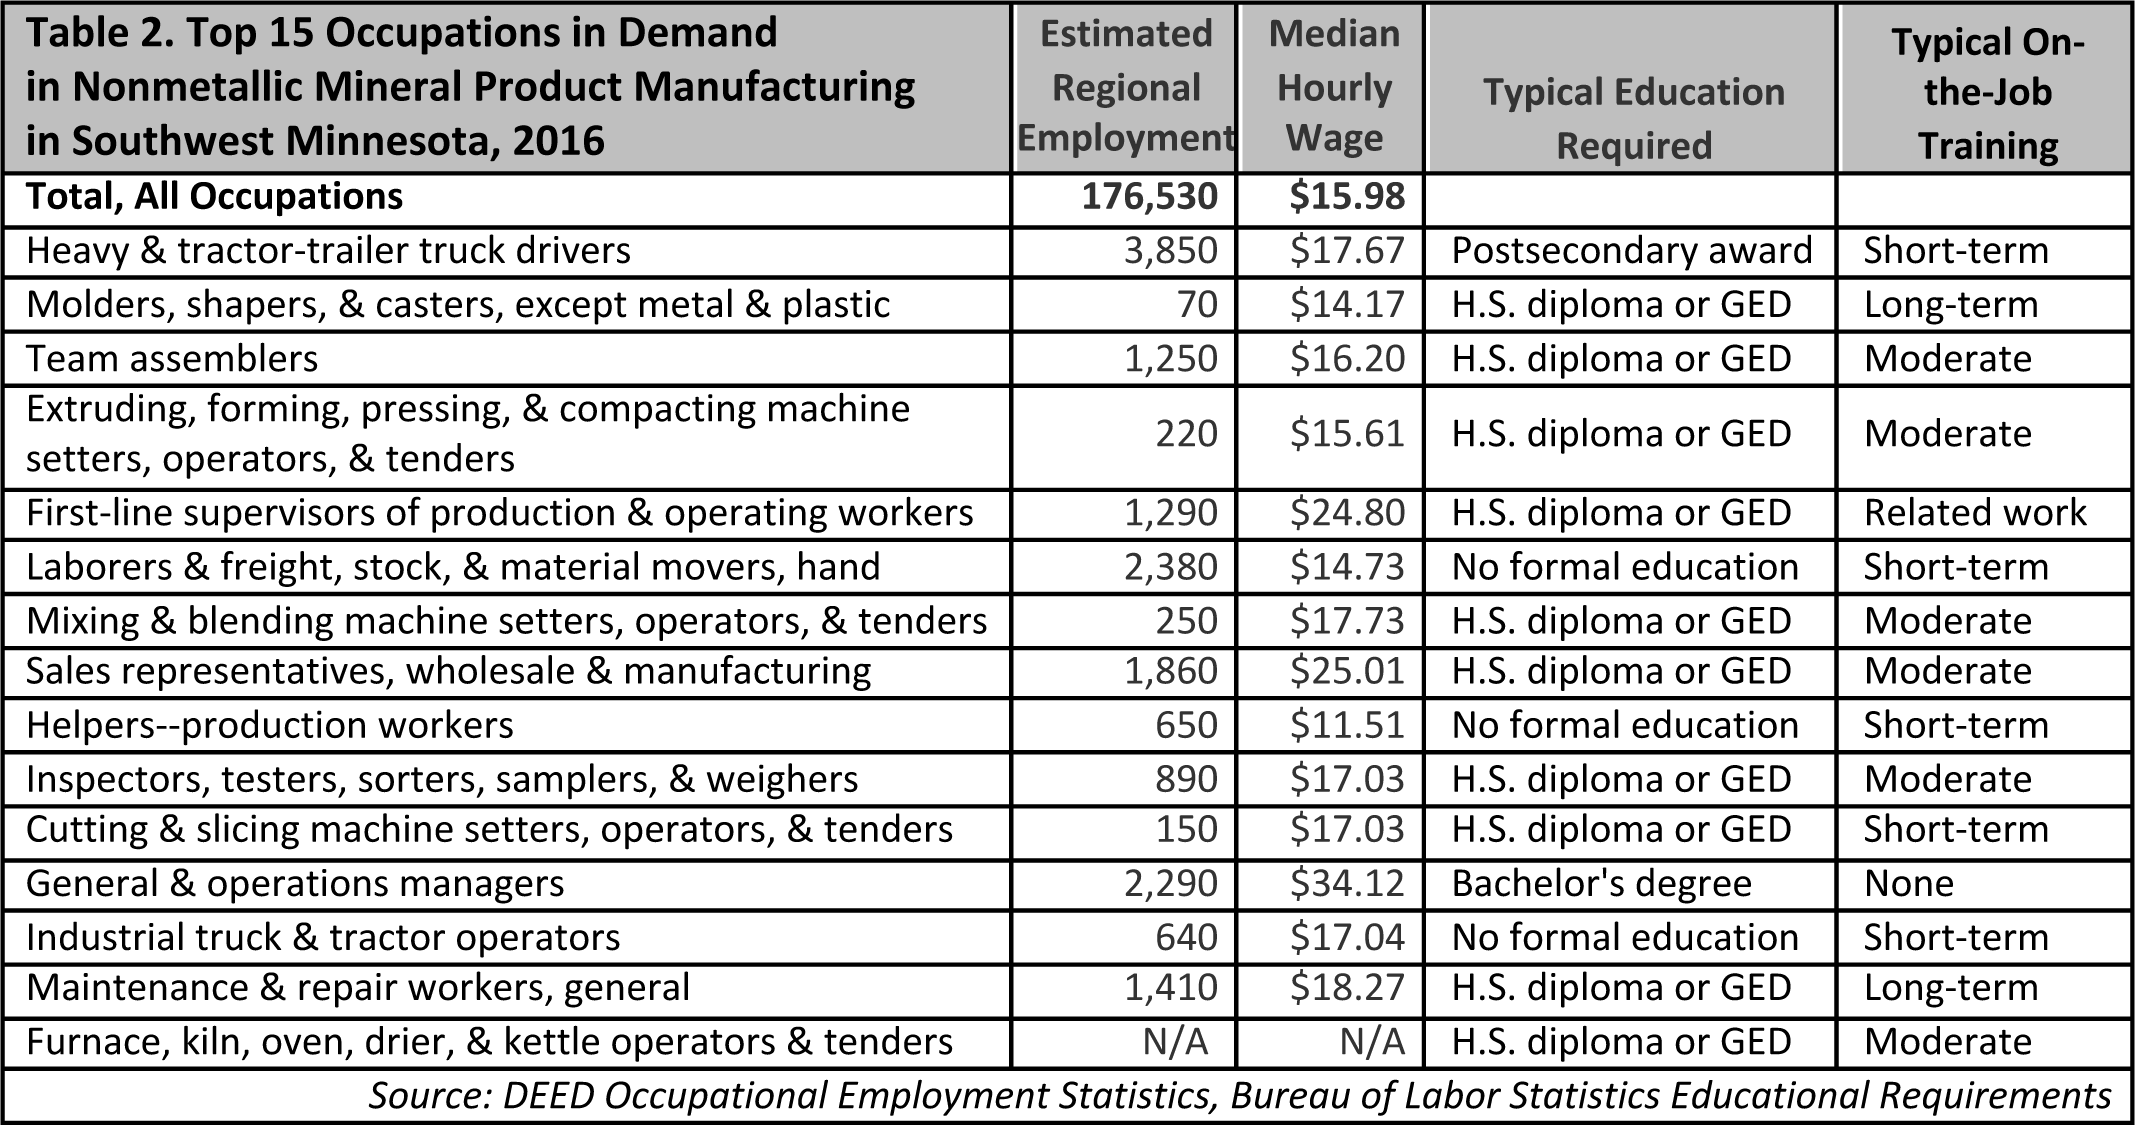 Top 15 Occupations in Demand in Nonmetallic Mineral Product Manufacturing in Southwest Minnesota, 2016